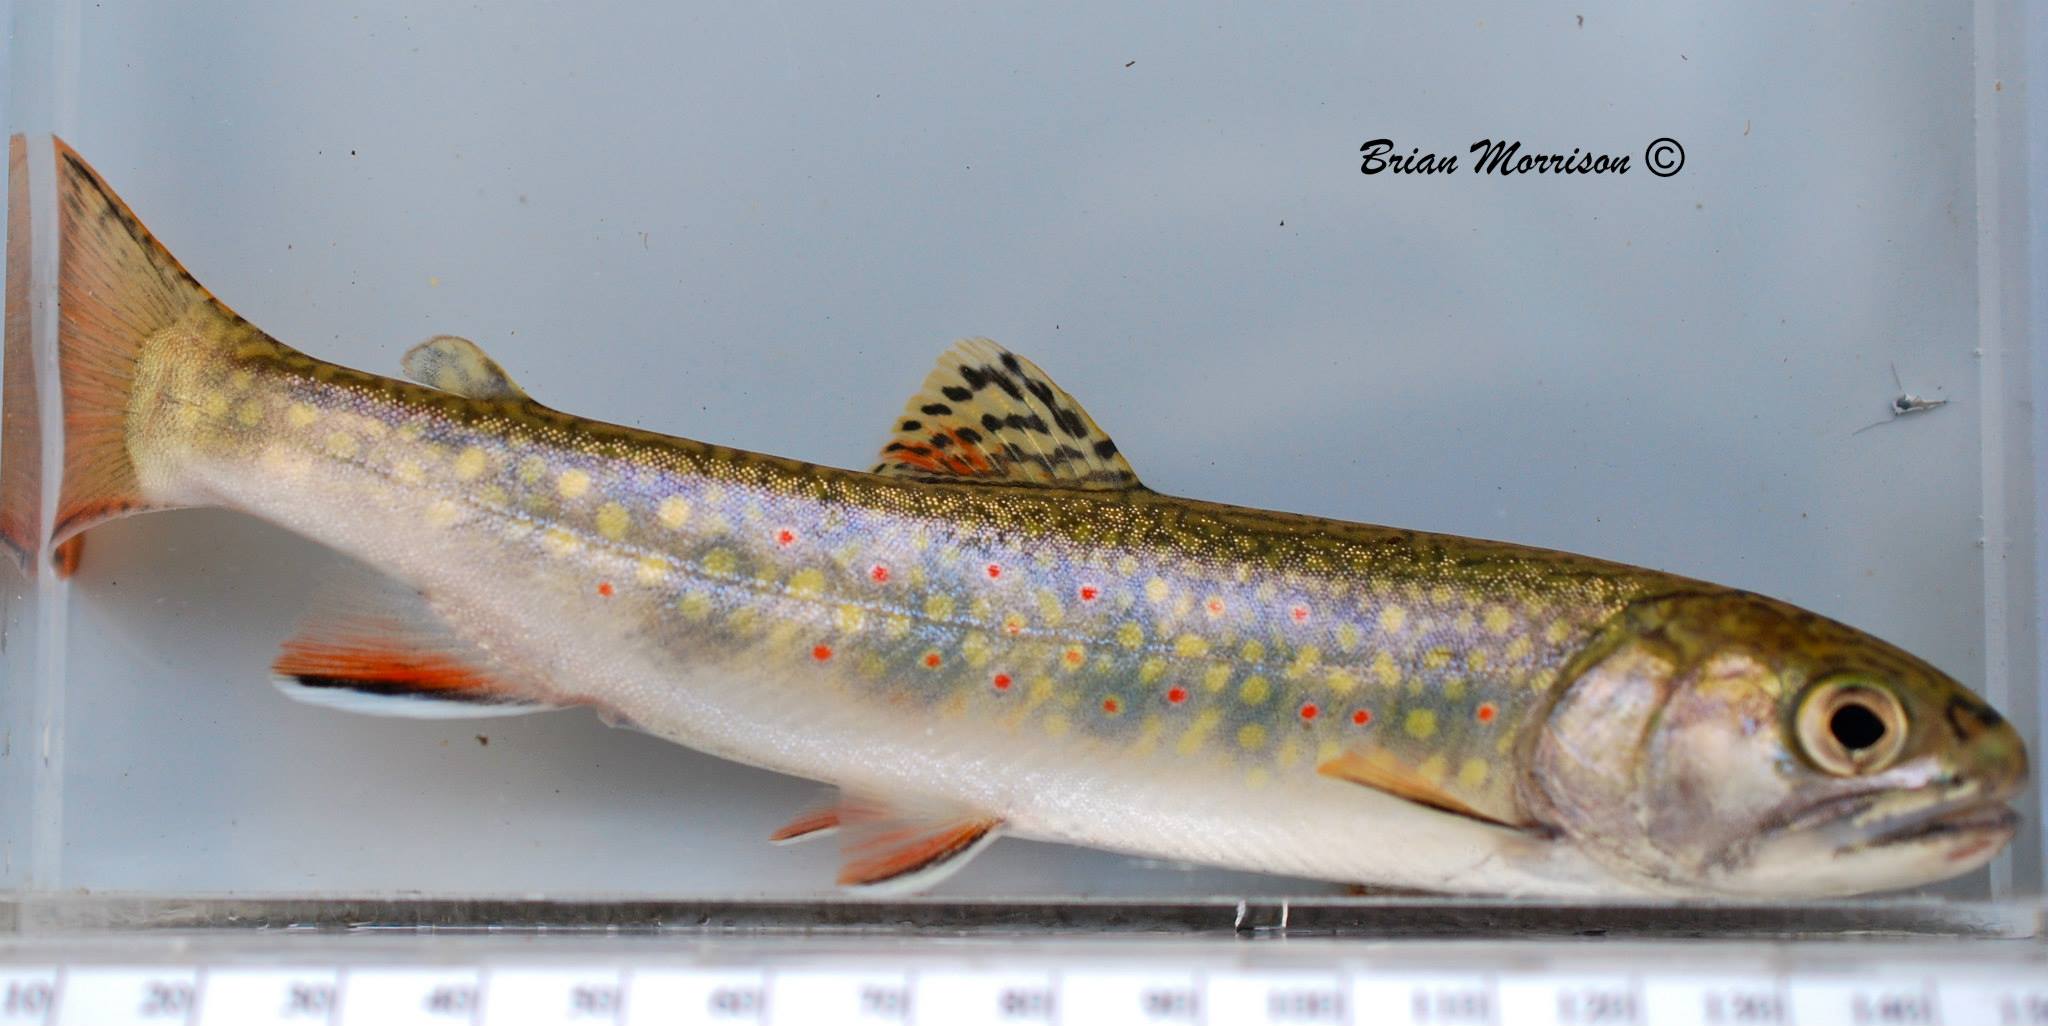 Brook Trout or Speckled Trout